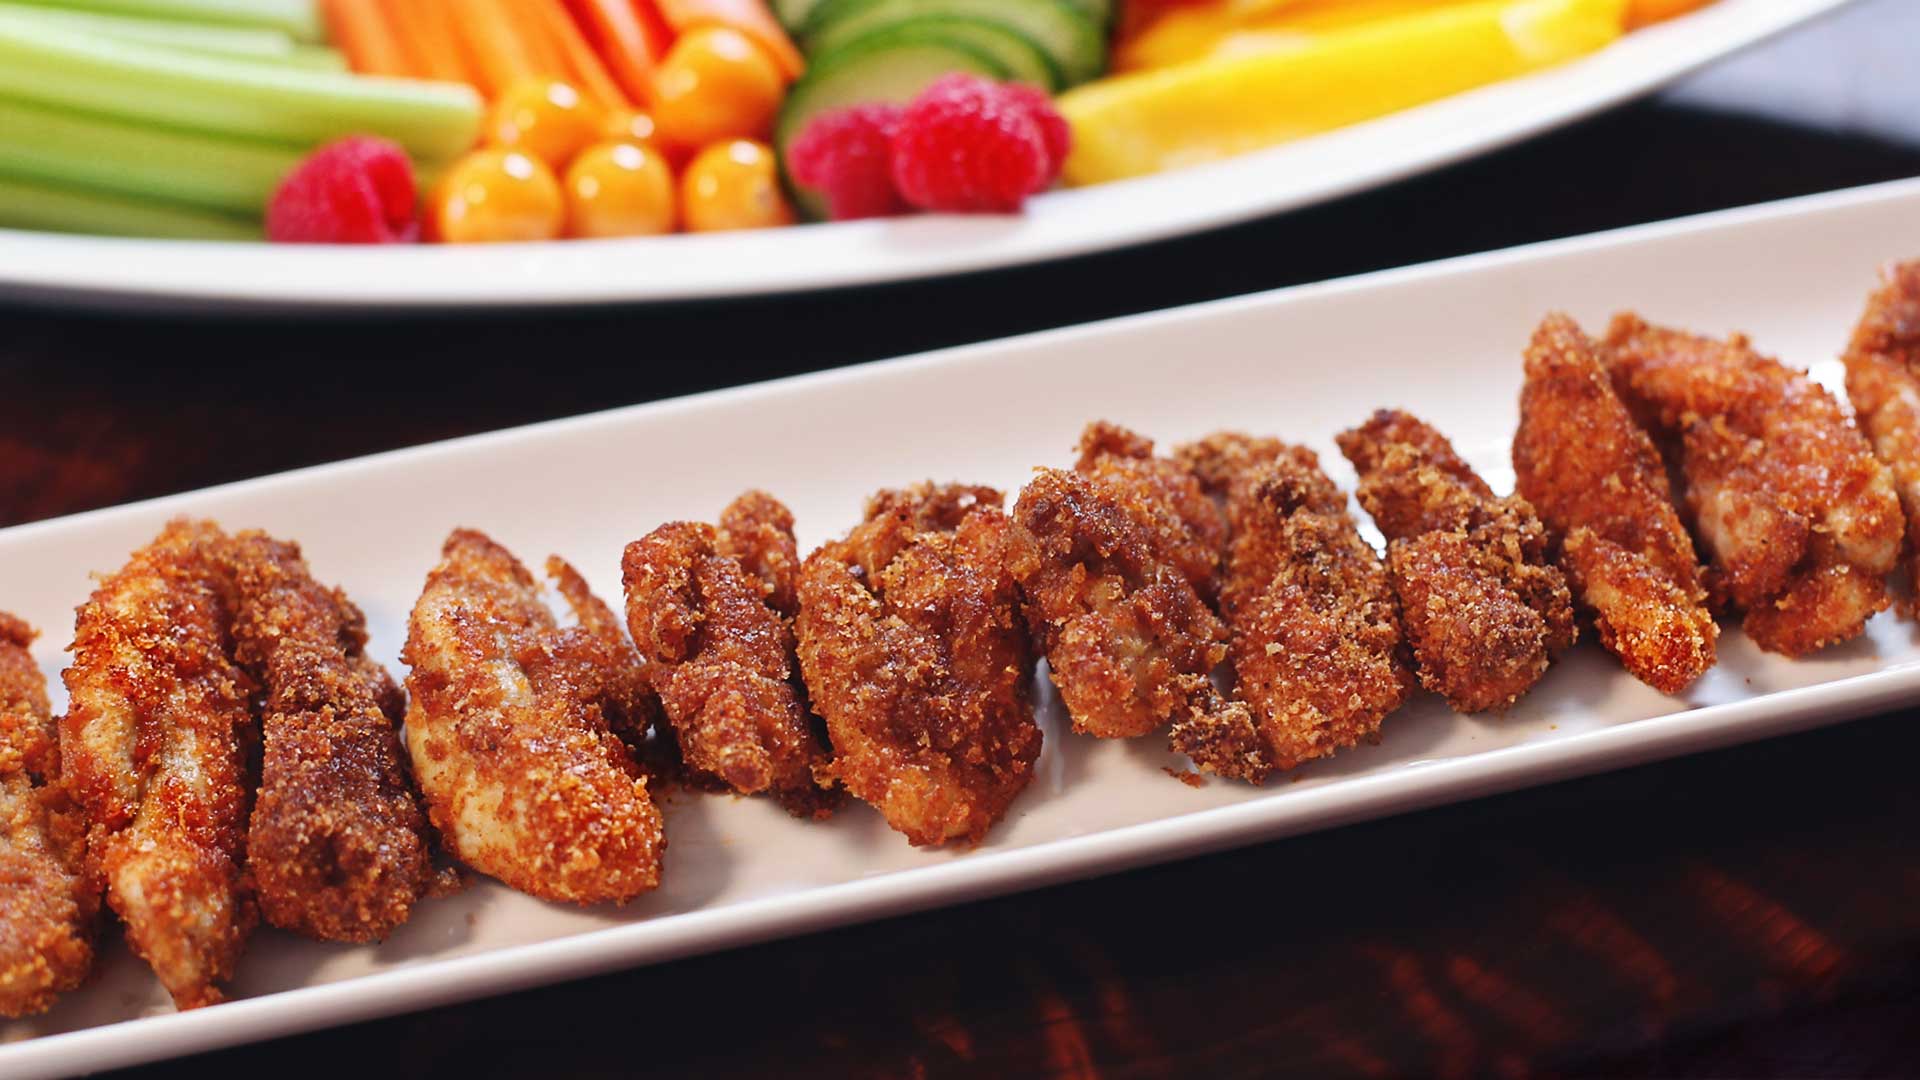 These gluten free air fryer chicken tenders are the perfect packable lunch for school & work! Not only are they gluten free they are also egg free, corn free, soy free & nut free with an equally delicious dairy & rice free option! lunch ideas, kids lunch ideas, gluten free lunch ideas, school lunch ideas, easy lunch ideas, gluten free kids lunch, chicken fingers, gluten free chicken fingers, egg free chicken strips, gluten free chicken strips, air fryer chicken strips, air fryer chicken fingers, air fry chicken fingers, frozen air fryer chicken fingers